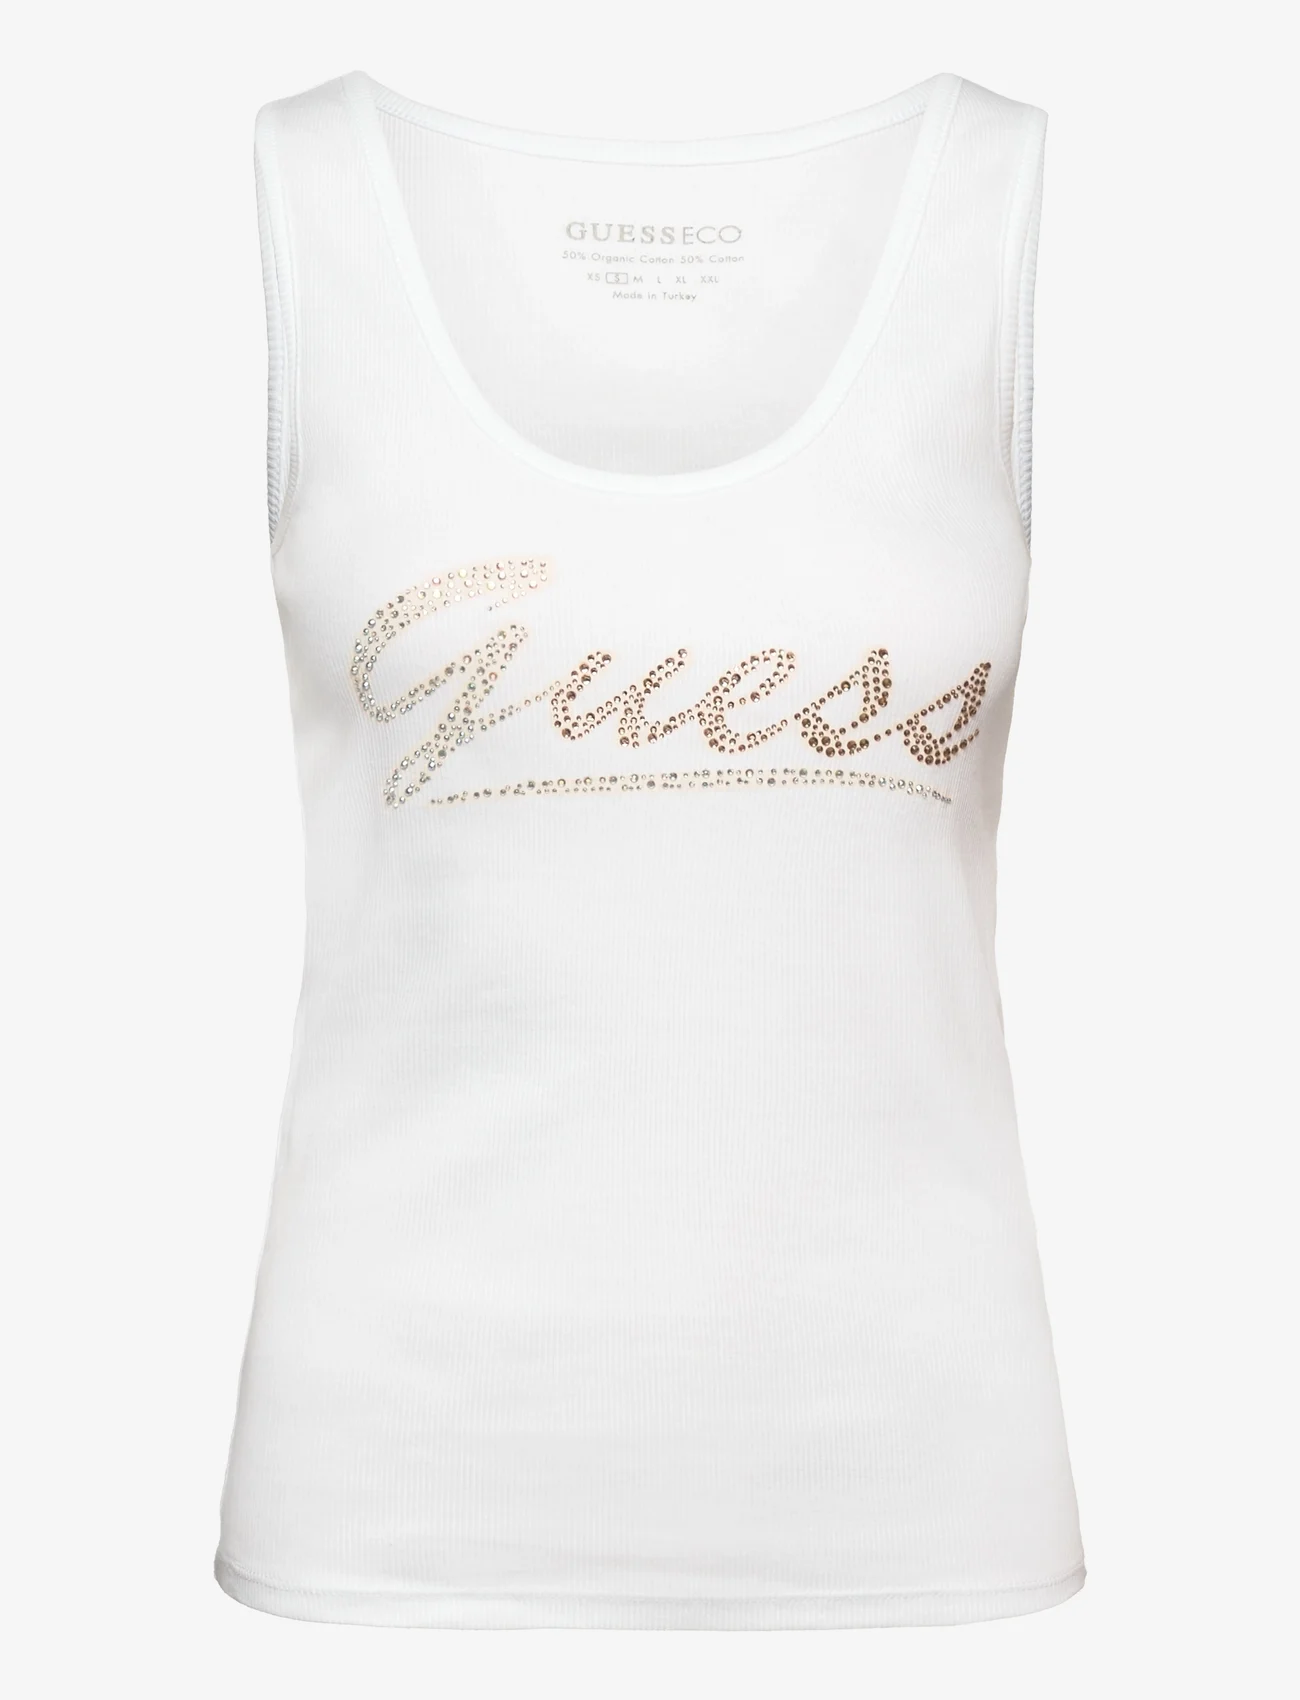 GUESS Jeans - LOGO TANK TOP - sleeveless tops - pure white - 0